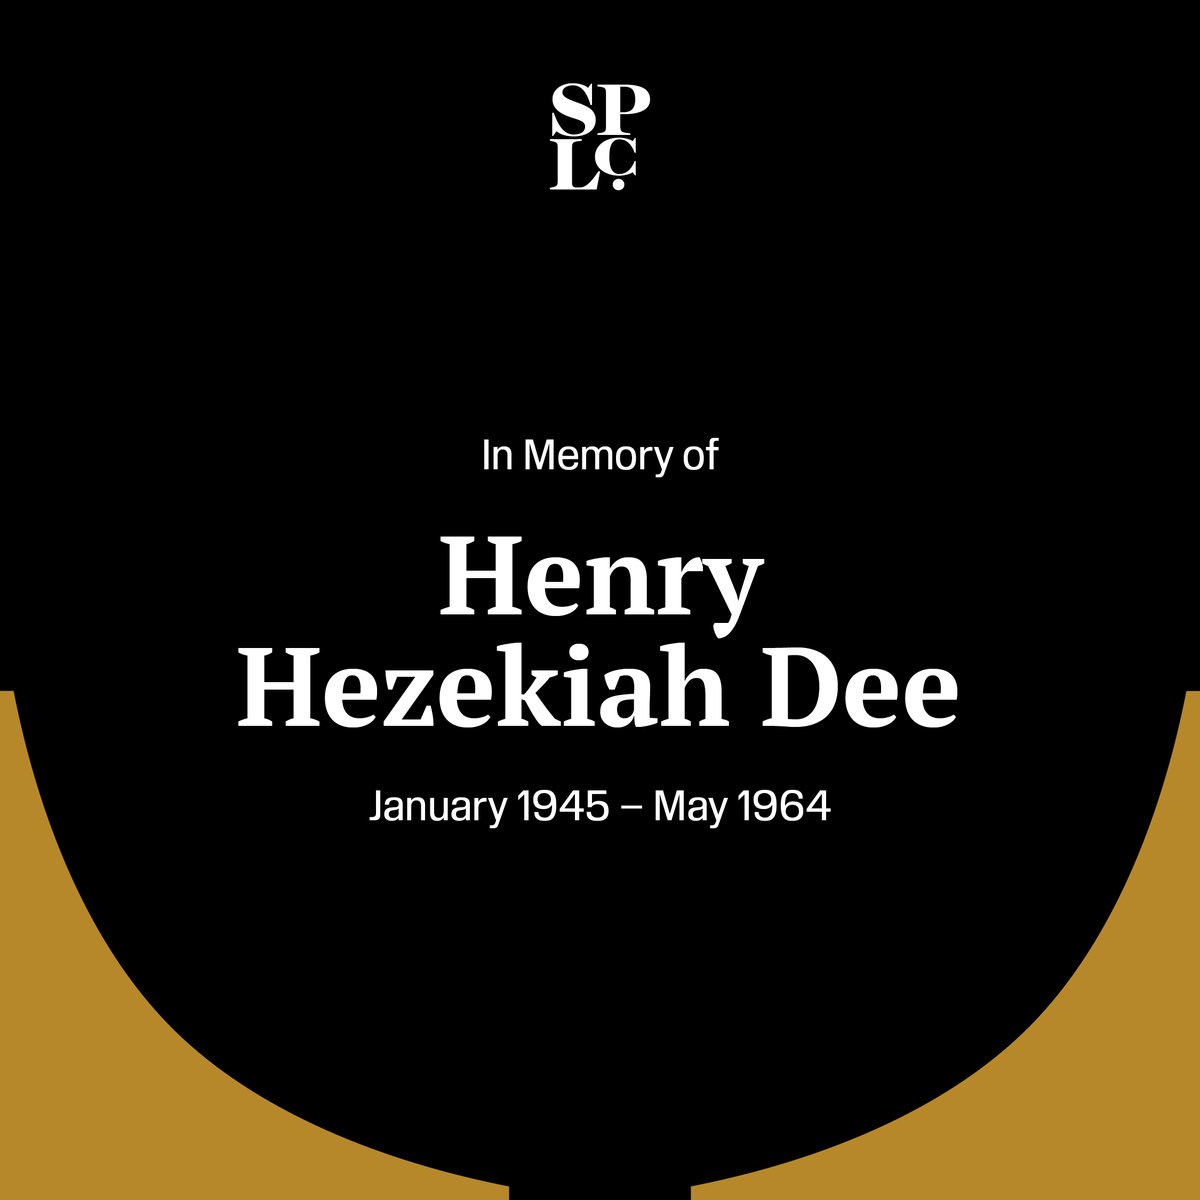 Abducted and murdered by the KKK #OTD in 1964, Henry Hezekiah Dee and Charles Eddie Moore didn't receive justice. It was a cold case until decades later, when Moore's brother began his own search for the truth. Rest in power.

#TheMarchContinues